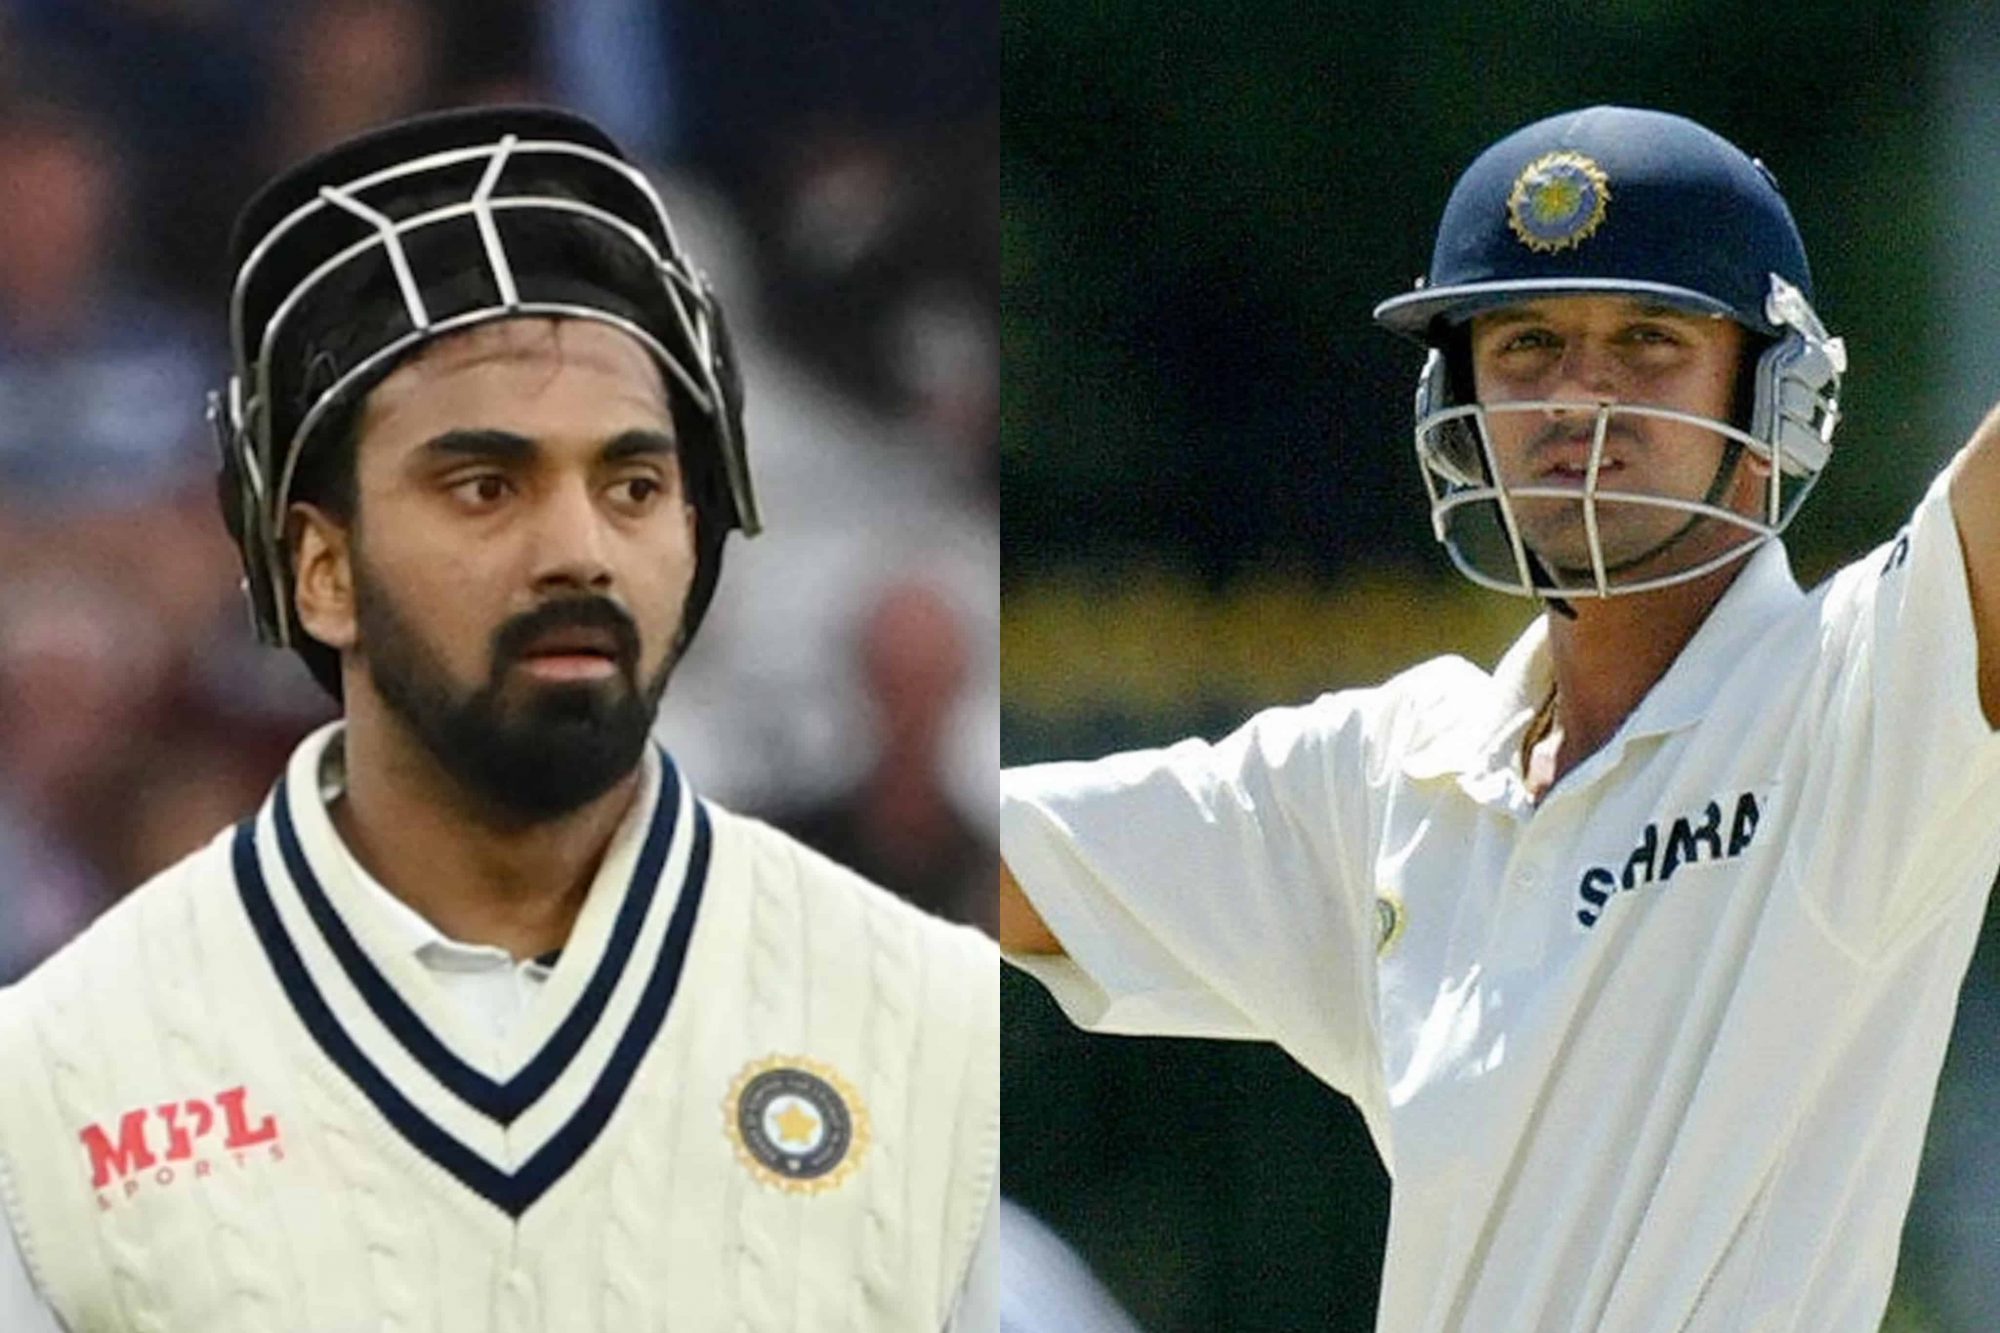 "It Could Be Bangalore Connection Or Connection Of Their Names" - Zaheer Khan Draws Comparison Between KL Rahul & Rahul Dravid